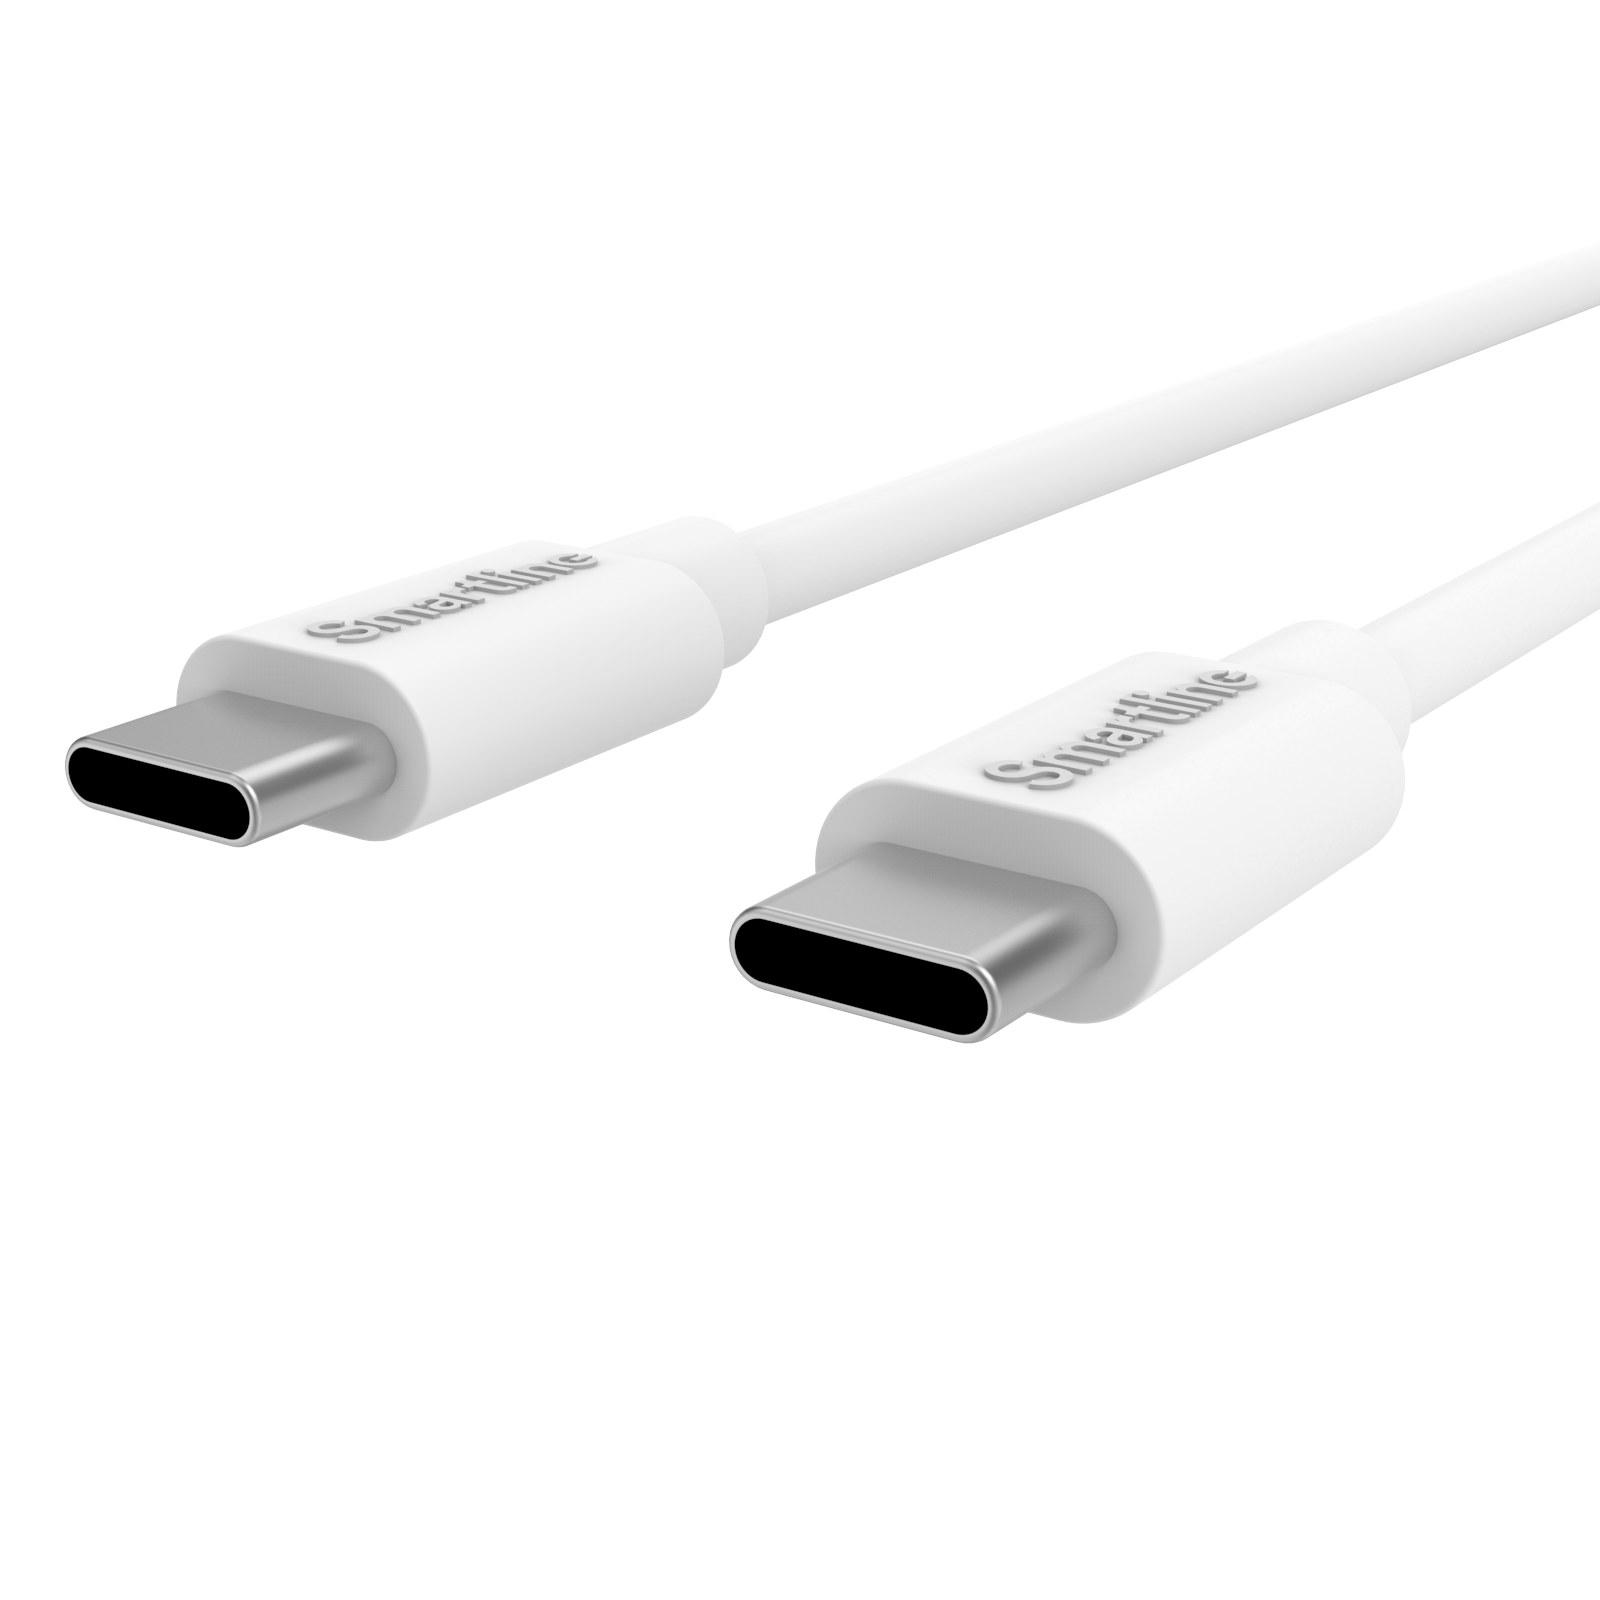 Premium Charger Moto G24 Power - 2 meter Cable and Dual Wall Charger USB-C 35W - Smartline